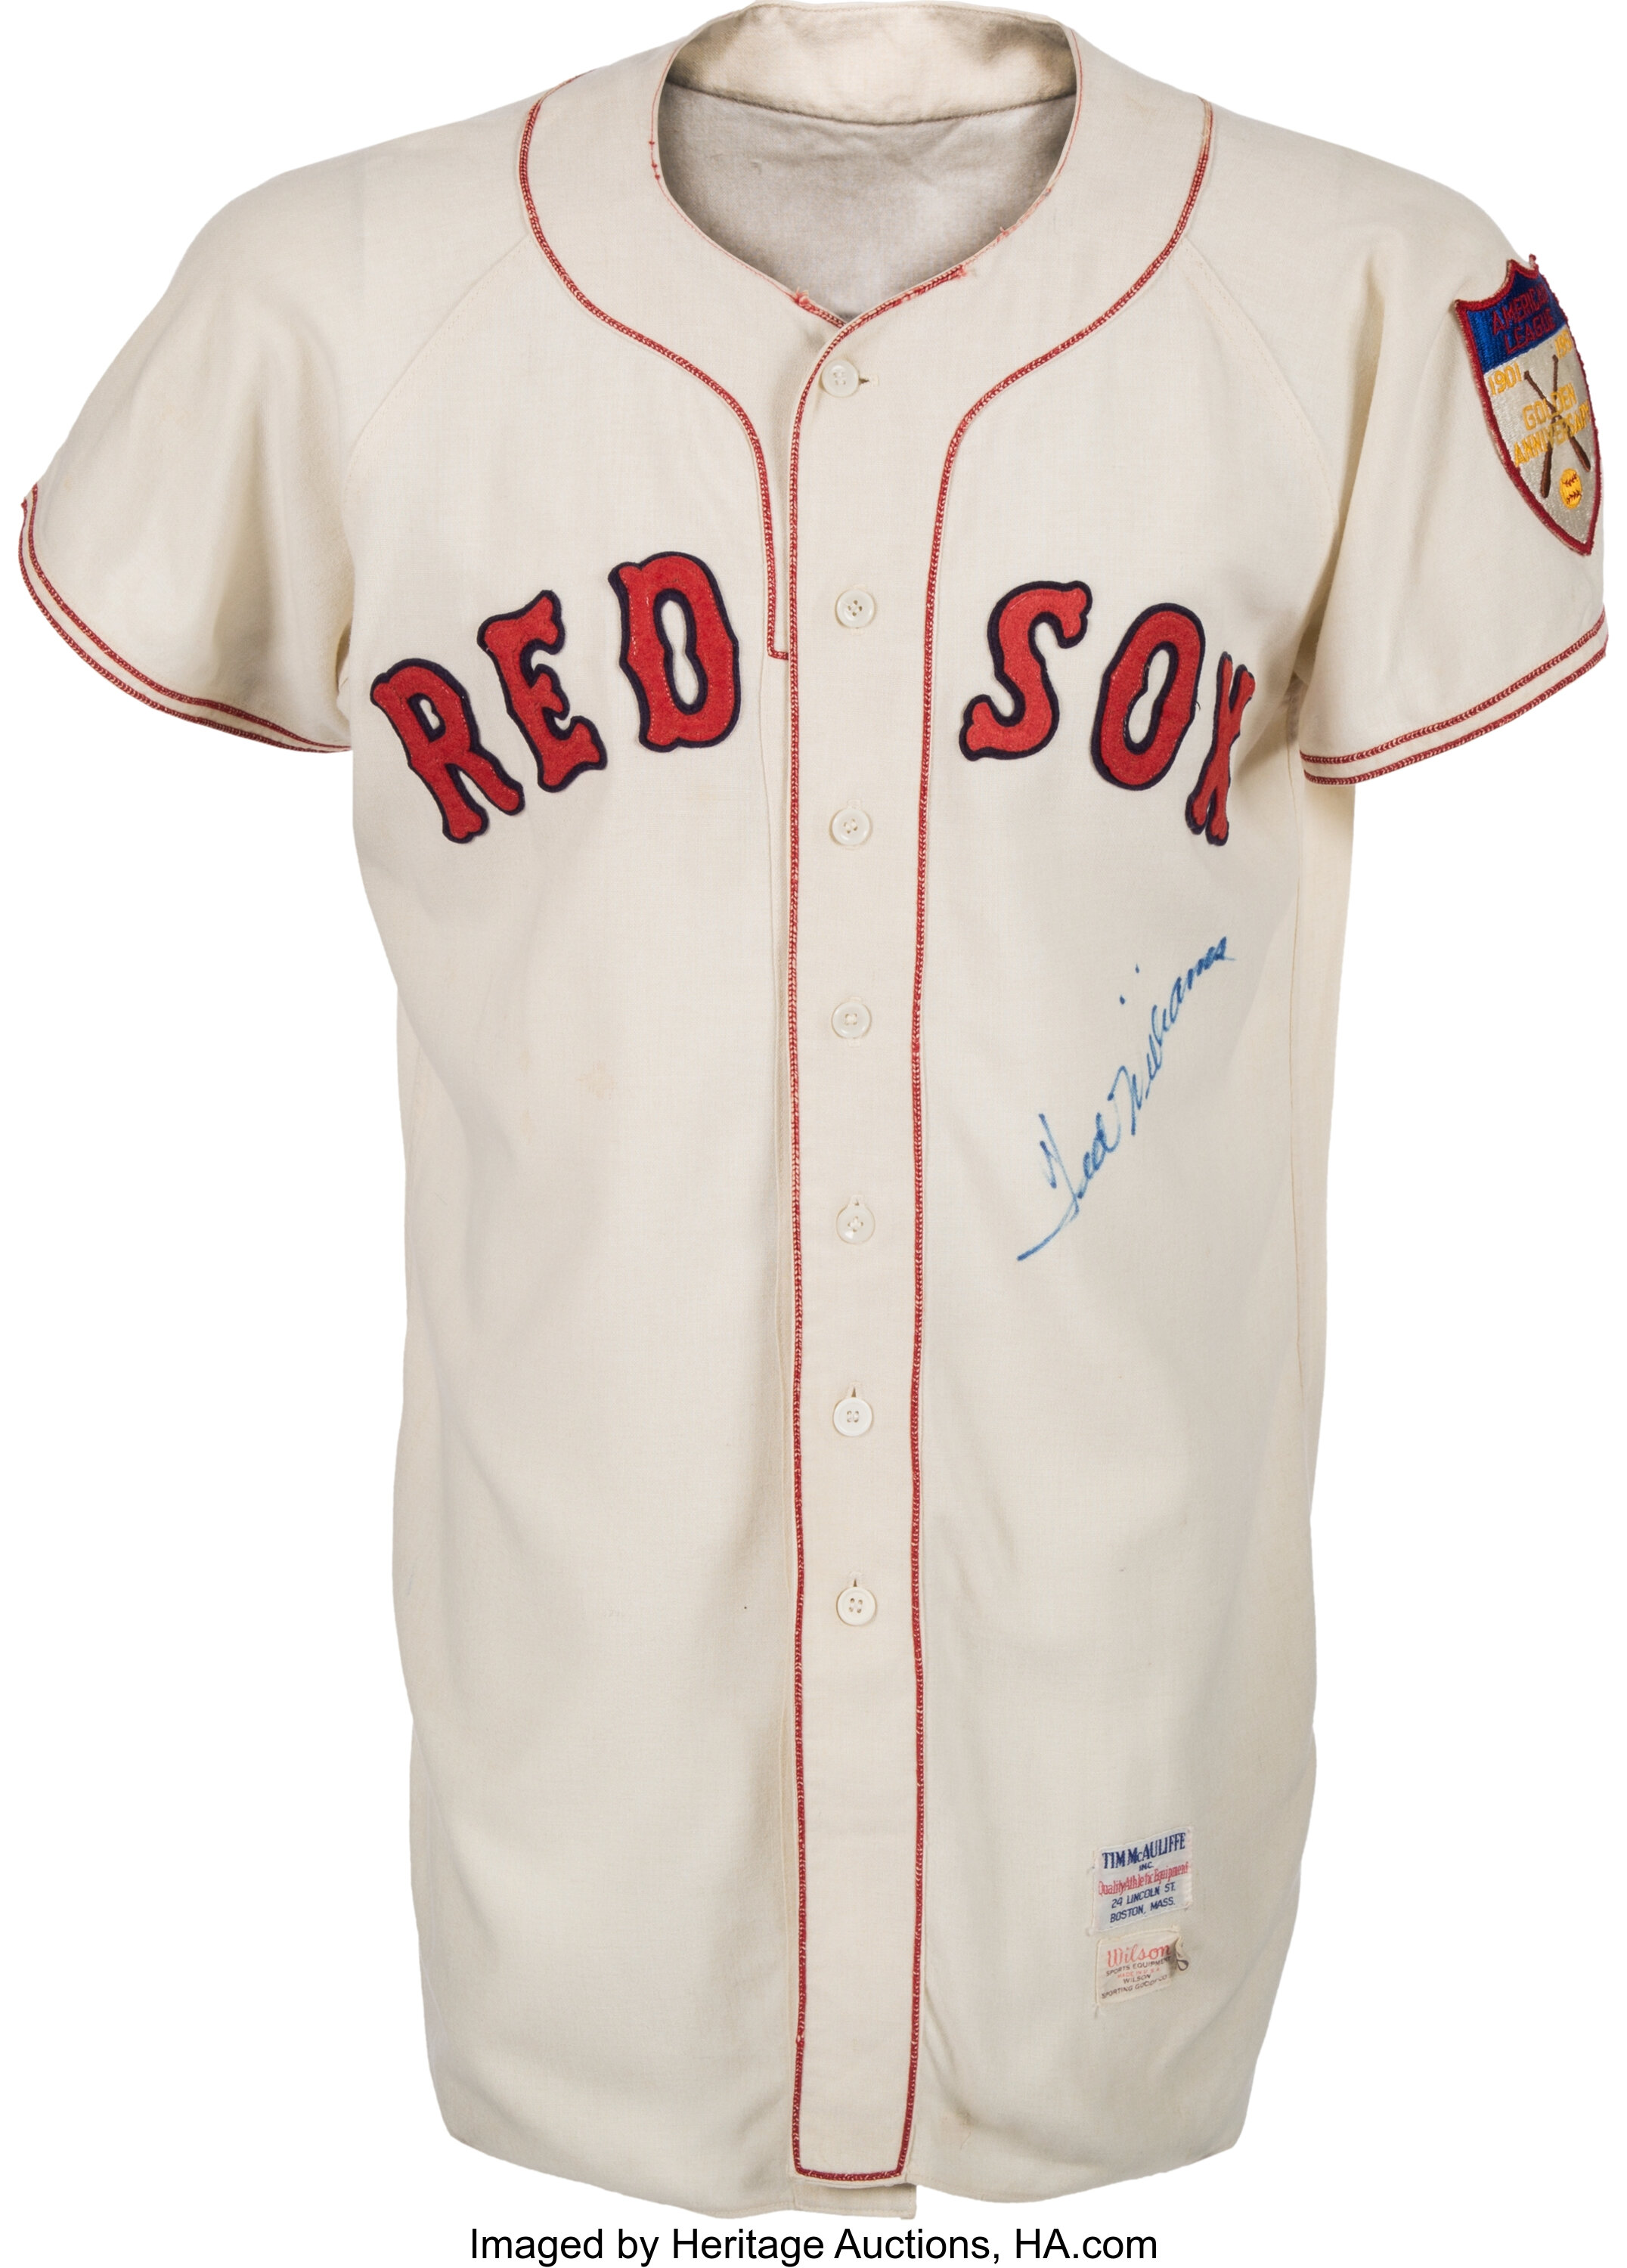 patch on red sox uniform